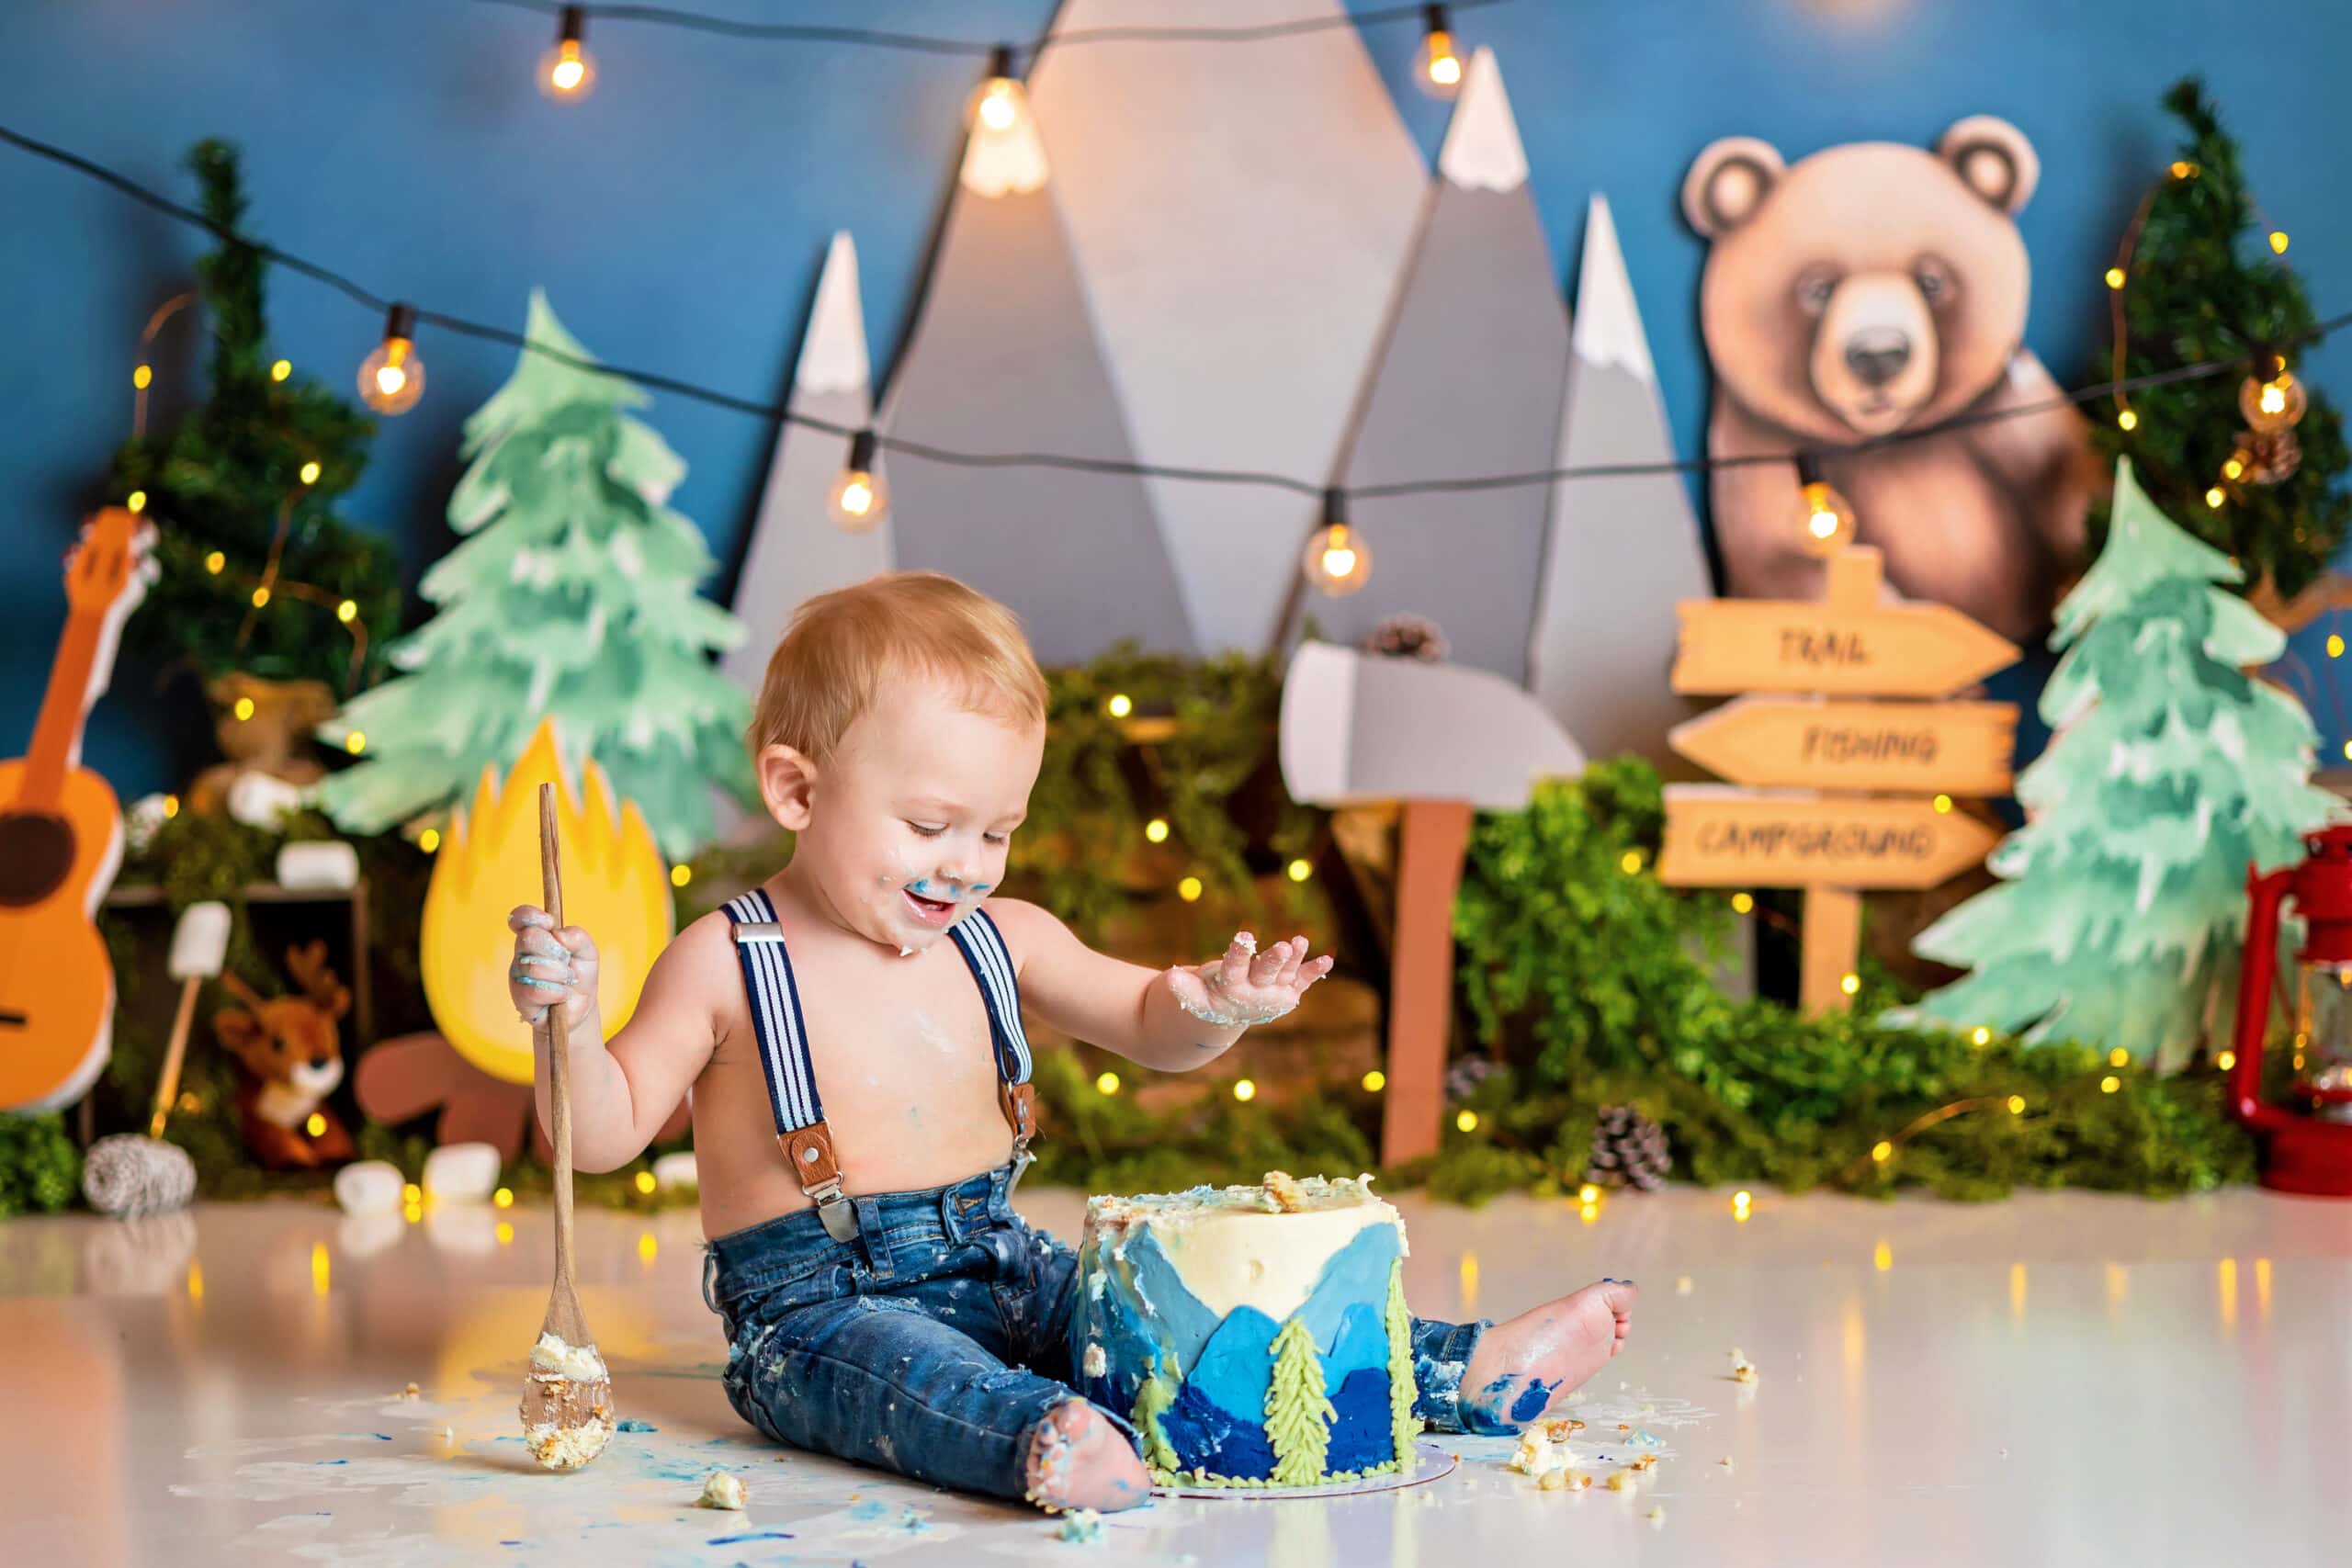 Camping Cake Smash Theme: A baby boy sits in front of a cake holding a wooden spoon